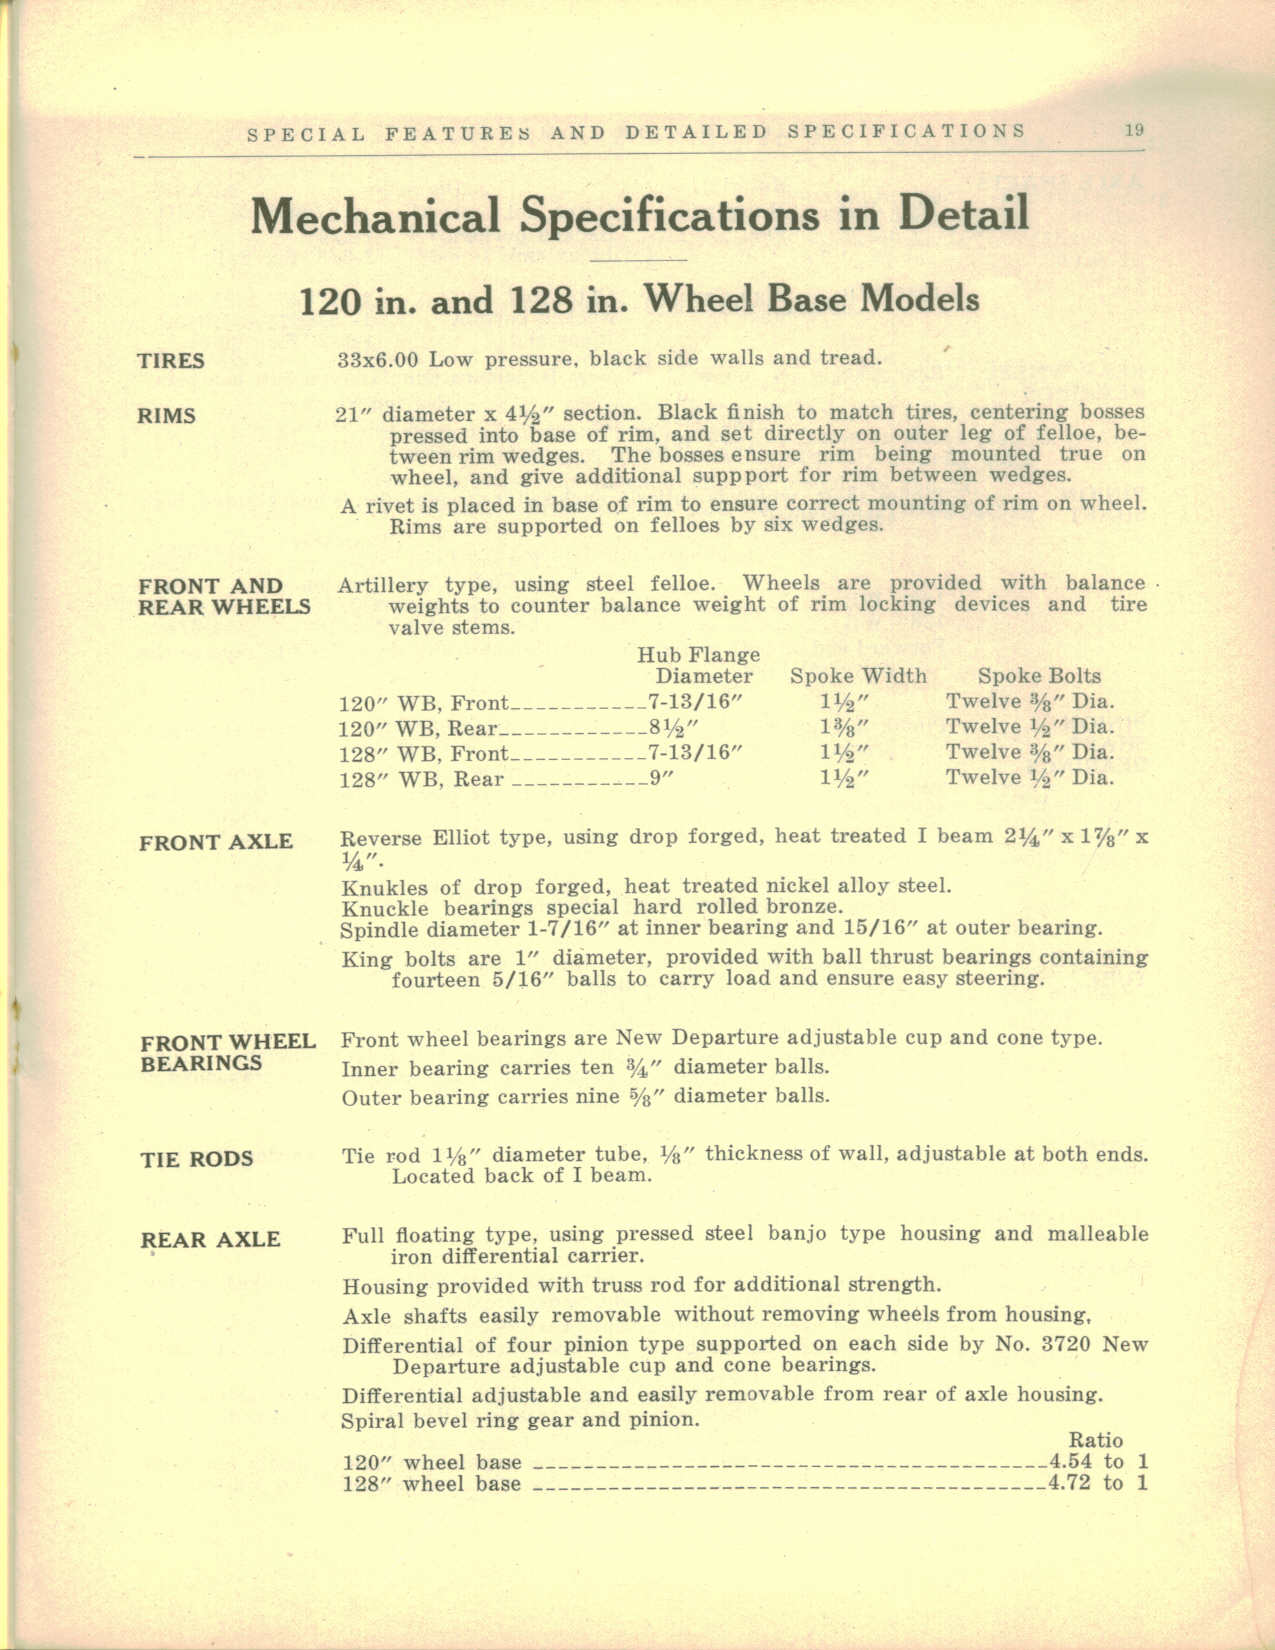 1927 Buick Special Features and Specs-19